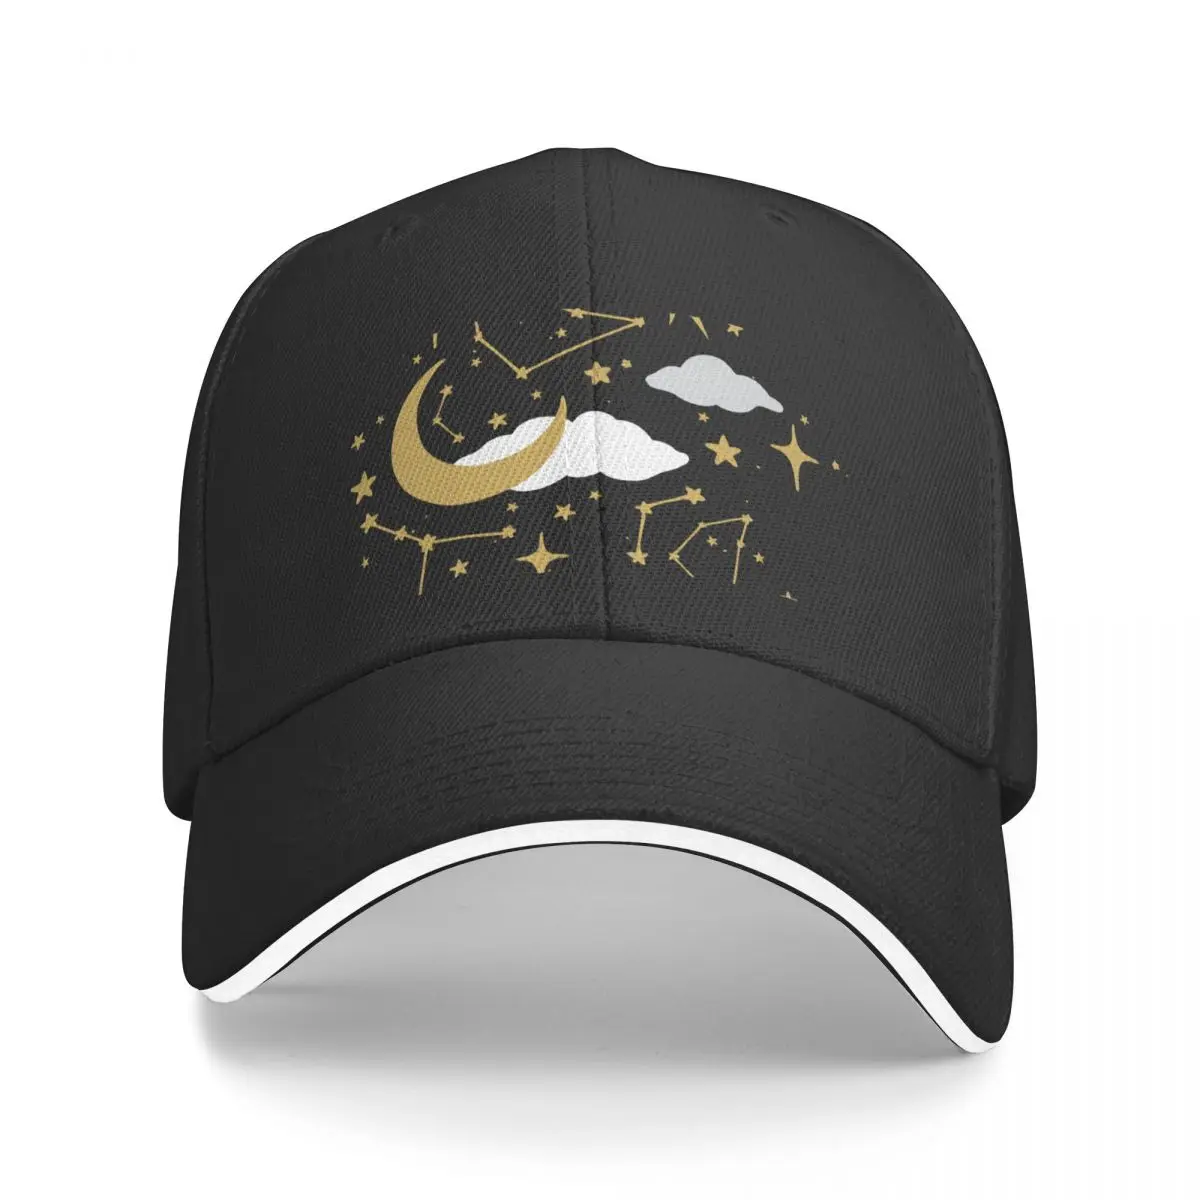 

New Celestial Stars and Moons in Gold and White Baseball Cap Caps Trucker Hats Women's Beach Outlet Men's